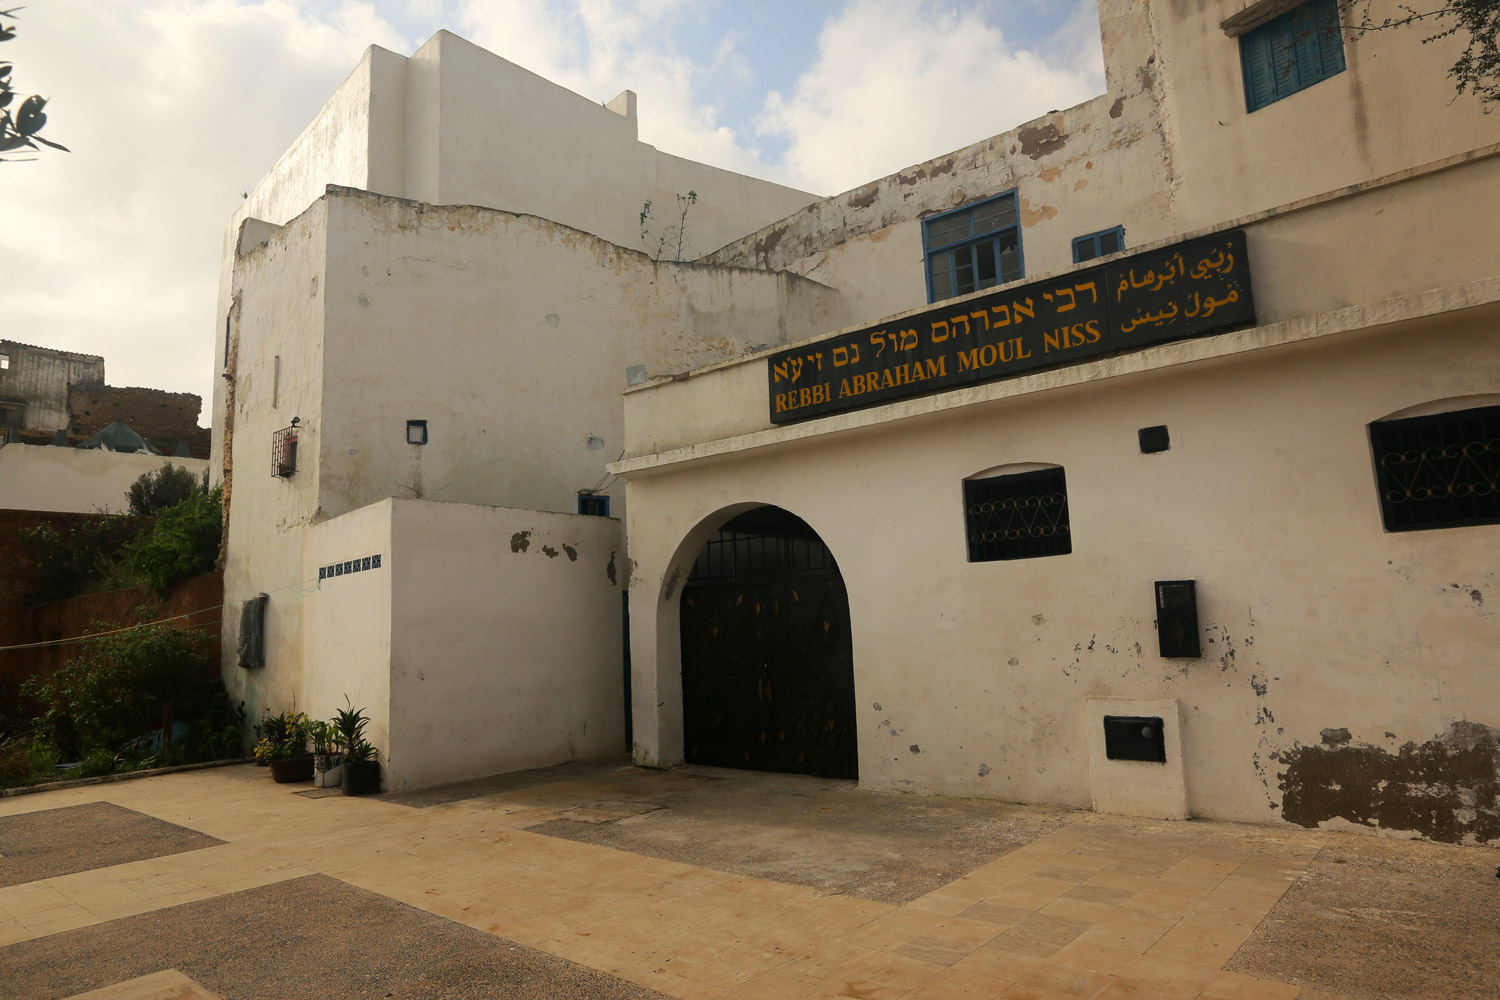 Exterior view of the entrance, with sign in Hebrew, French, and Arabic